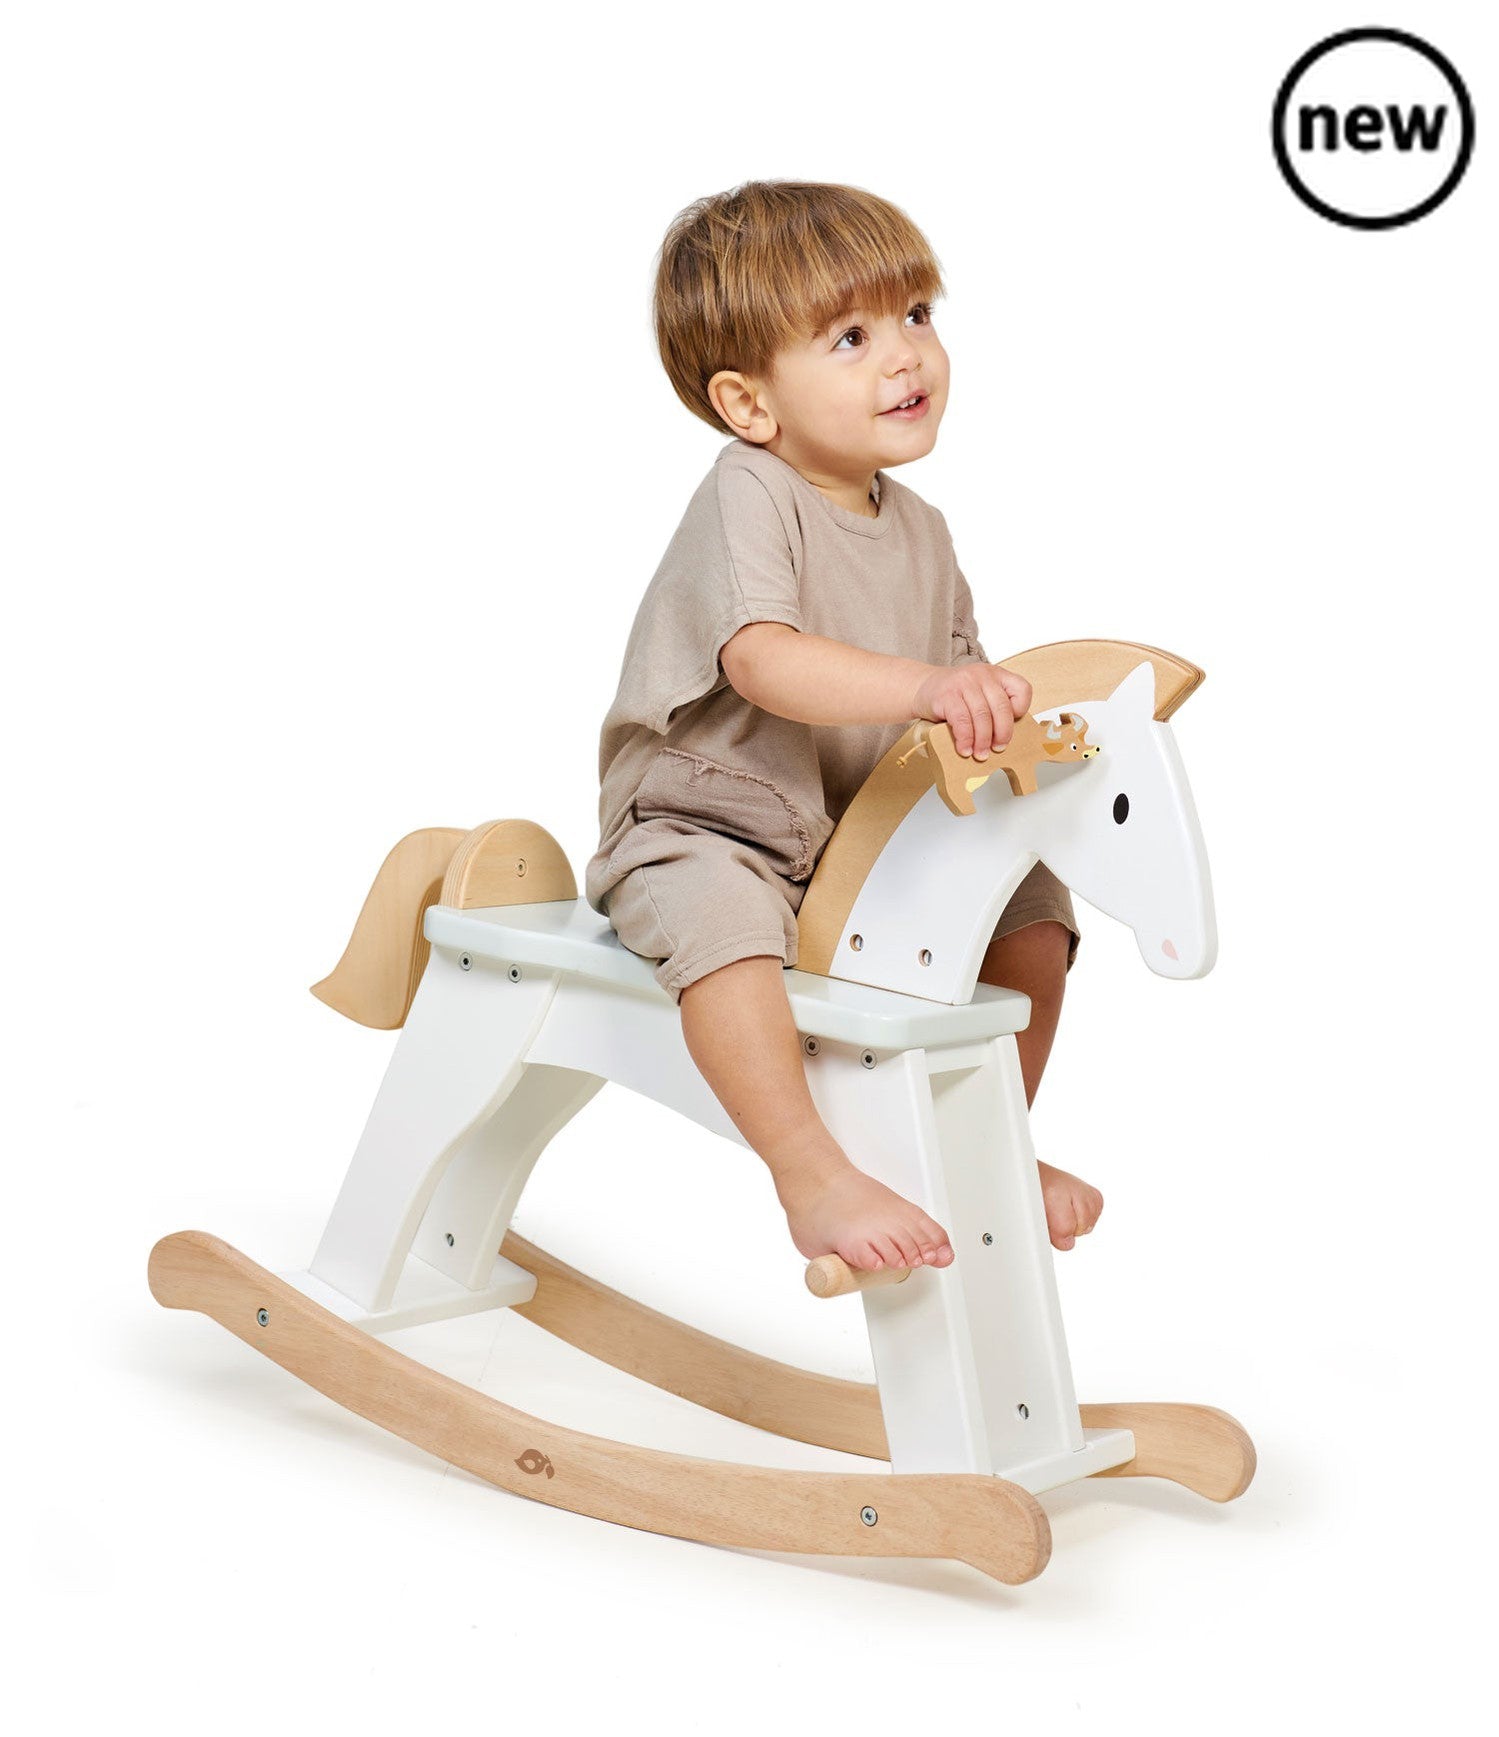 Tenderleaf Toys Wooden Lucky Rocking Horse, Gallop through the snowfields on your lucky horse. A premium rocking horse inspired by the classics. A traditional and essential toy for the nursery or playroom. Simple and chic, painted in white with details in natural wood., Tenderleaf Toys Wooden Lucky Rocking Horse,Wooden Toys,Tenderleaf, 